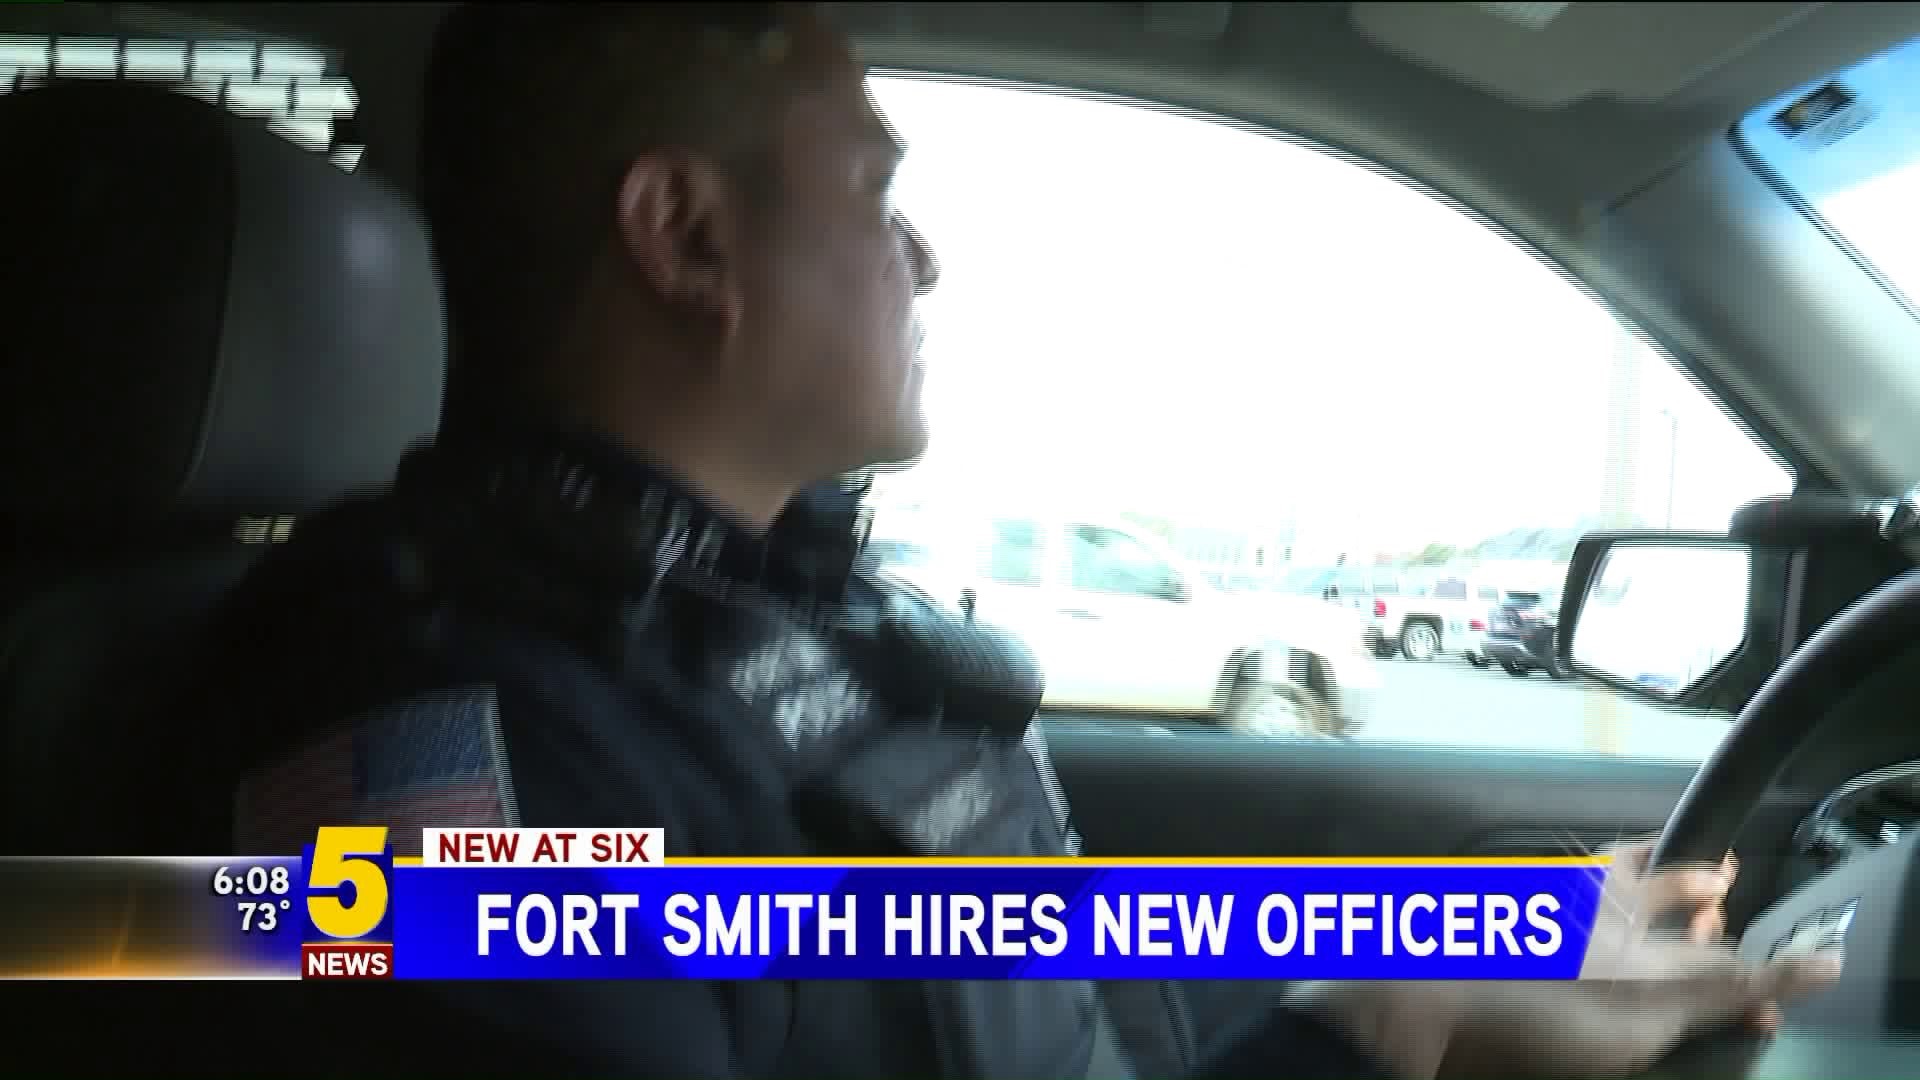 Fort Smith Hires New Officers